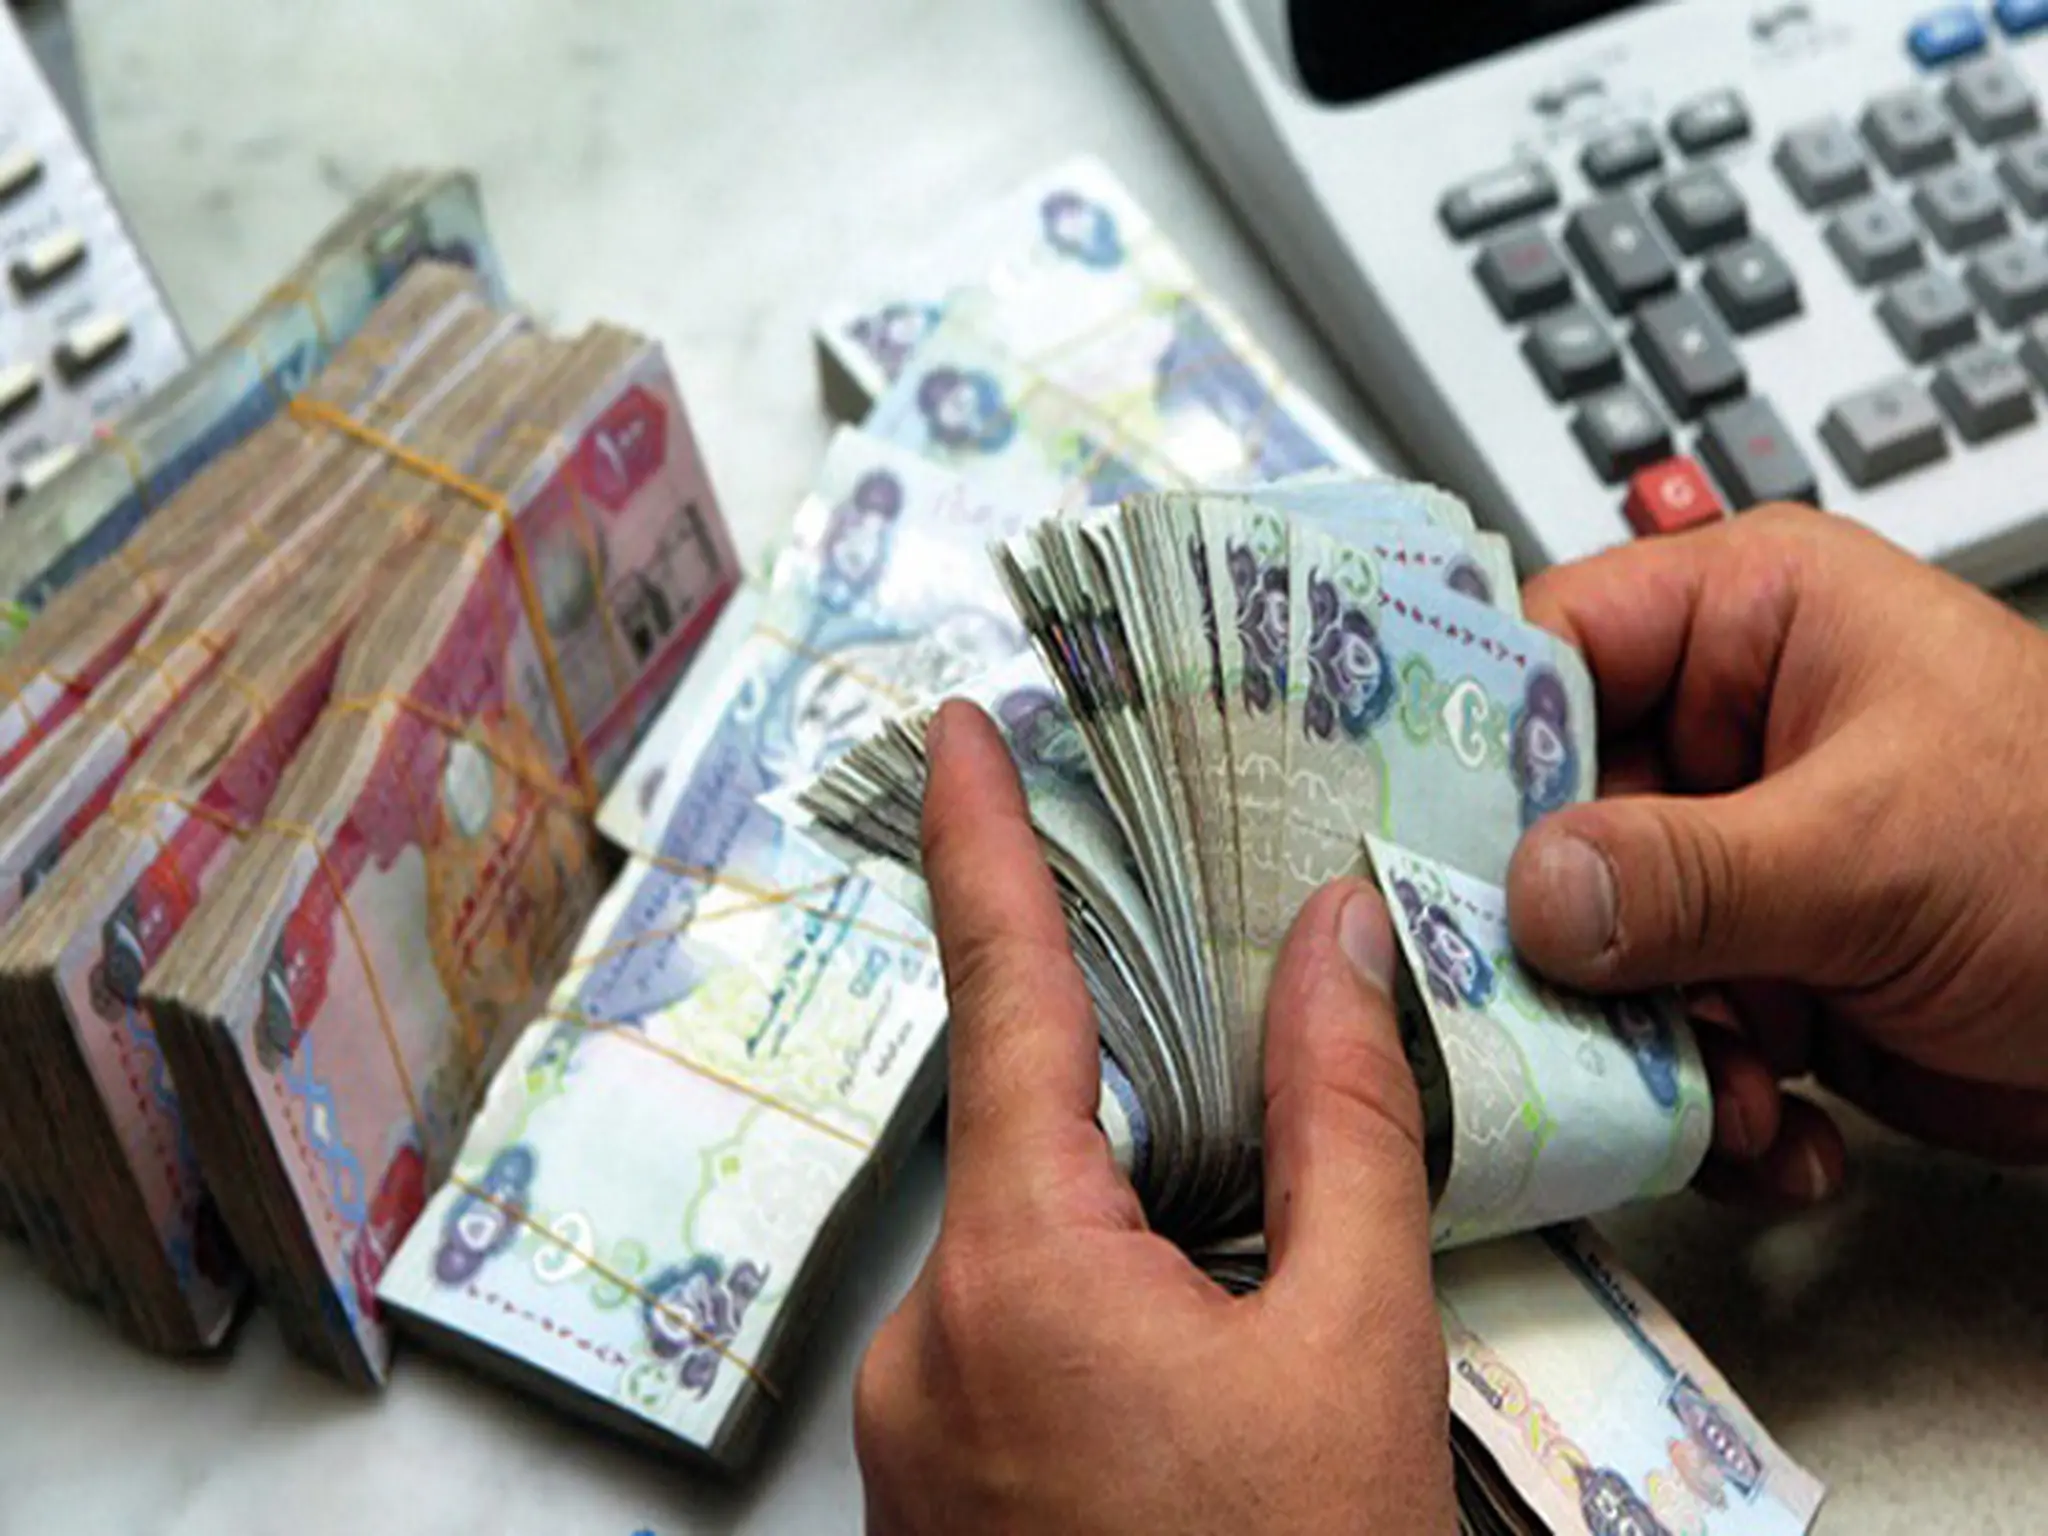 Urgent UAE: 8 legal cases that allow employers to deduct a worker's salary